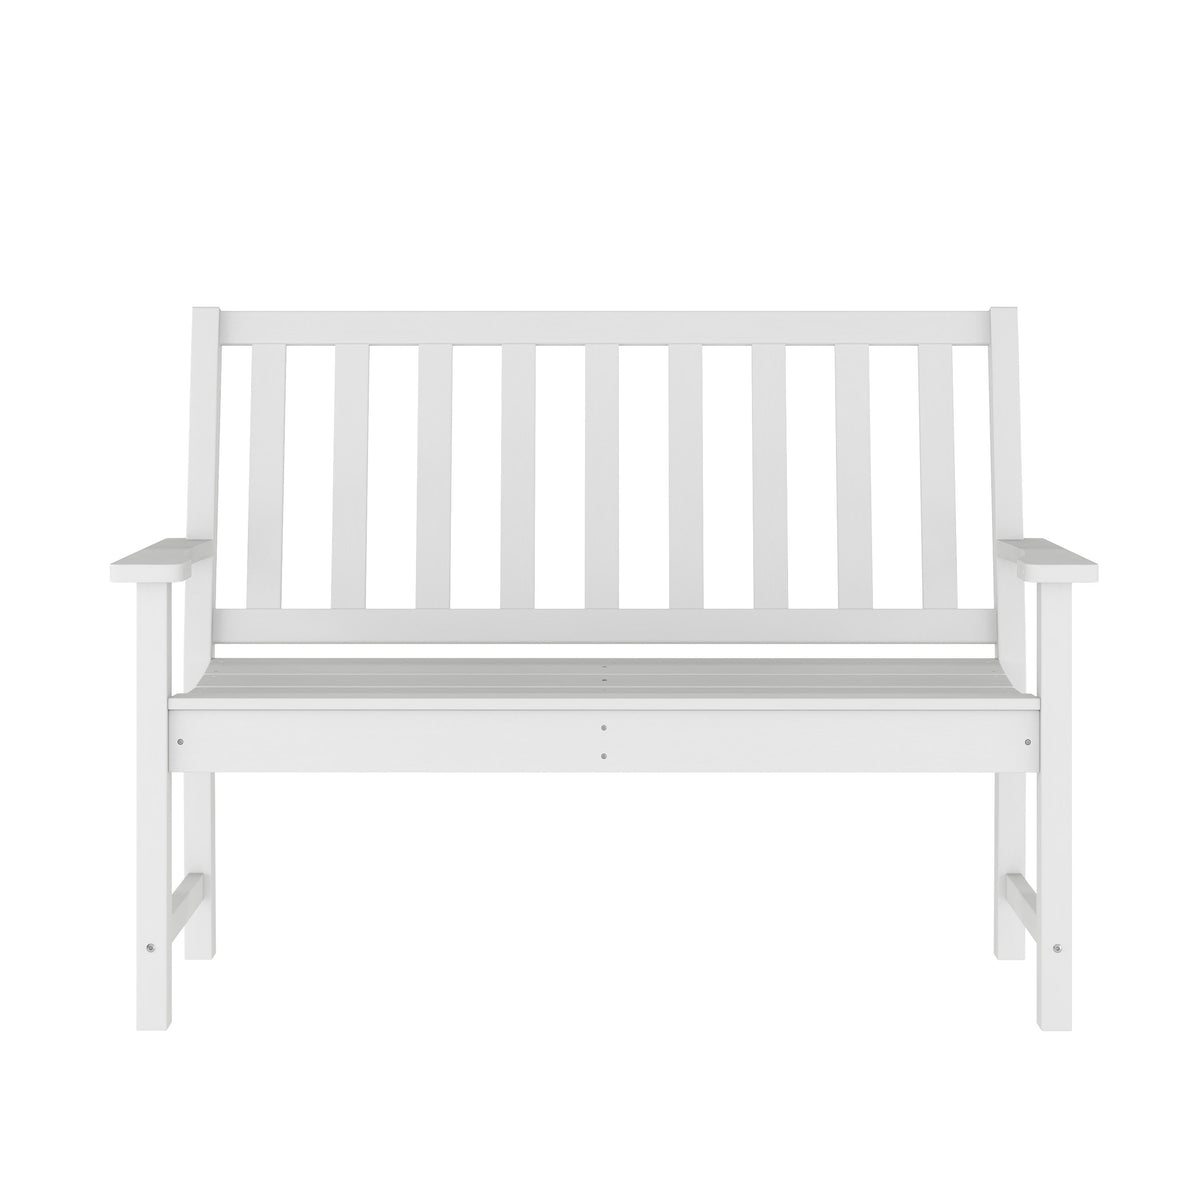 White |#| All Weather Heavy Duty Commercial Recycled HDPE Bench with Curved Seat in White